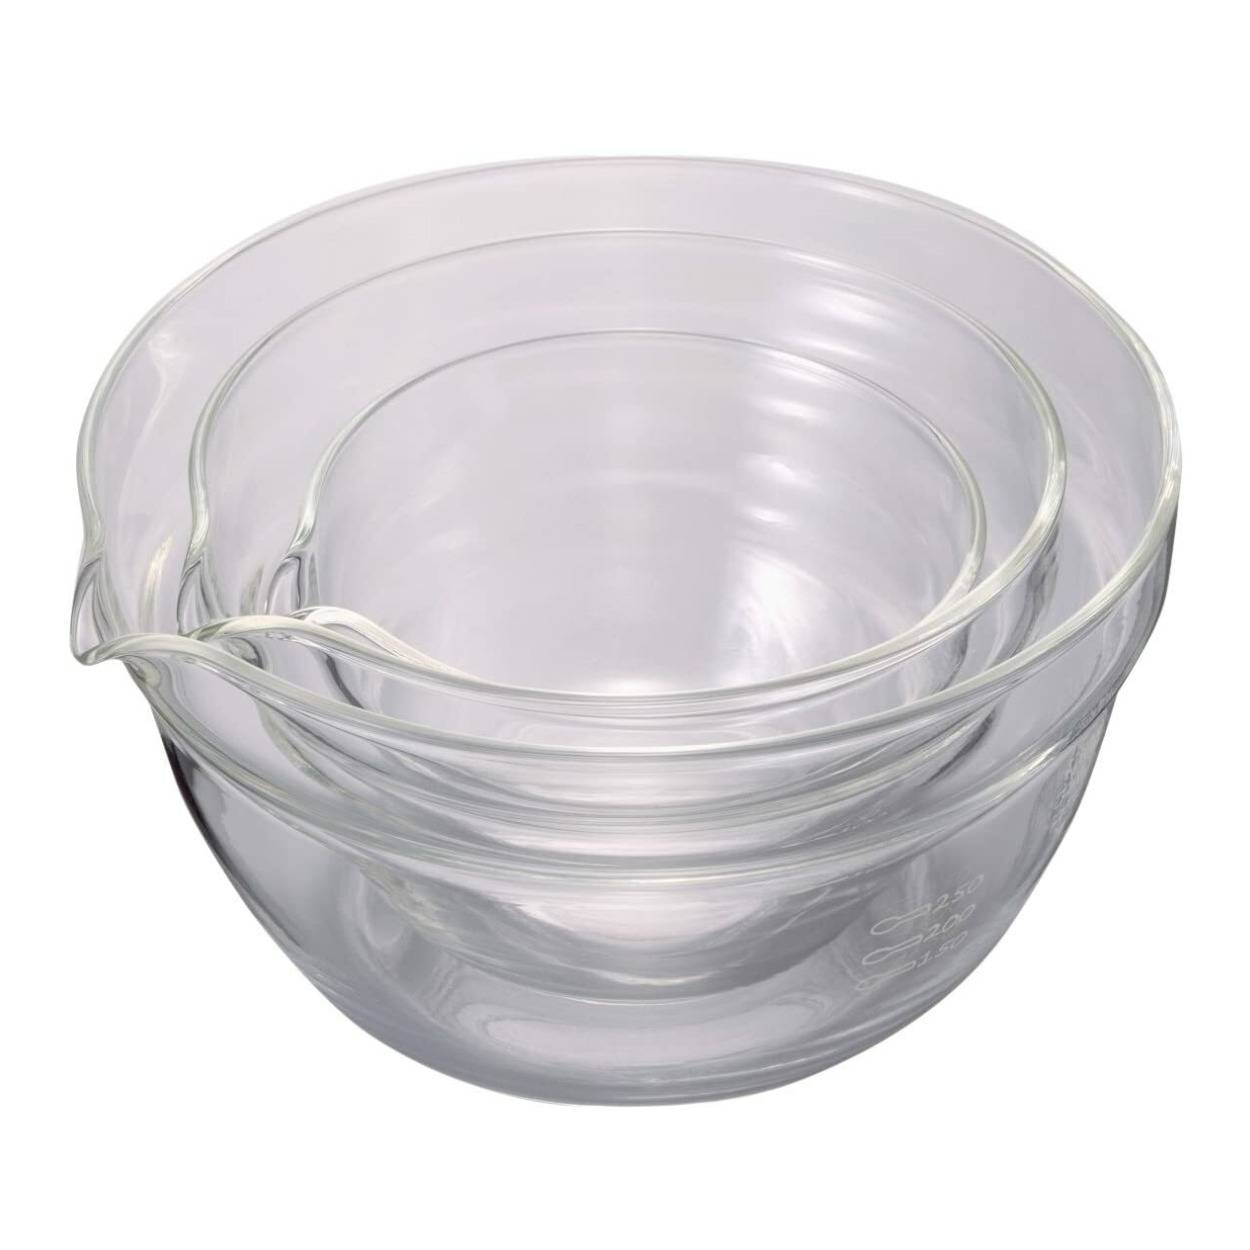 Hario Mixing Bowl with Spout 3-Piece Set